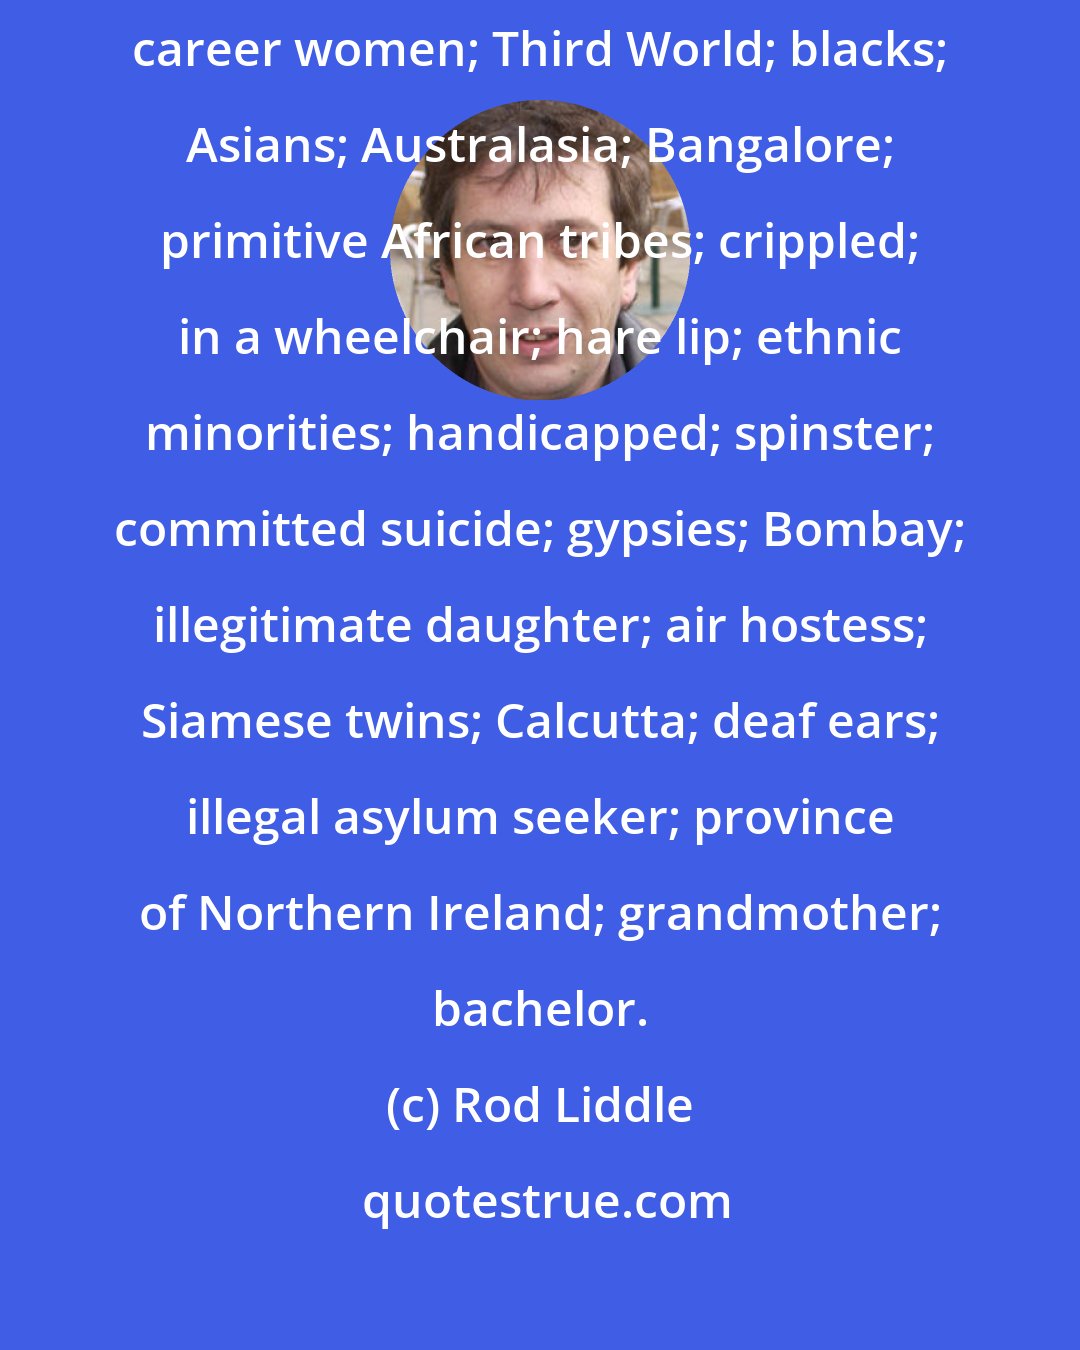 Rod Liddle: Here is the full list of the banned words I used: active homosexual; career women; Third World; blacks; Asians; Australasia; Bangalore; primitive African tribes; crippled; in a wheelchair; hare lip; ethnic minorities; handicapped; spinster; committed suicide; gypsies; Bombay; illegitimate daughter; air hostess; Siamese twins; Calcutta; deaf ears; illegal asylum seeker; province of Northern Ireland; grandmother; bachelor.